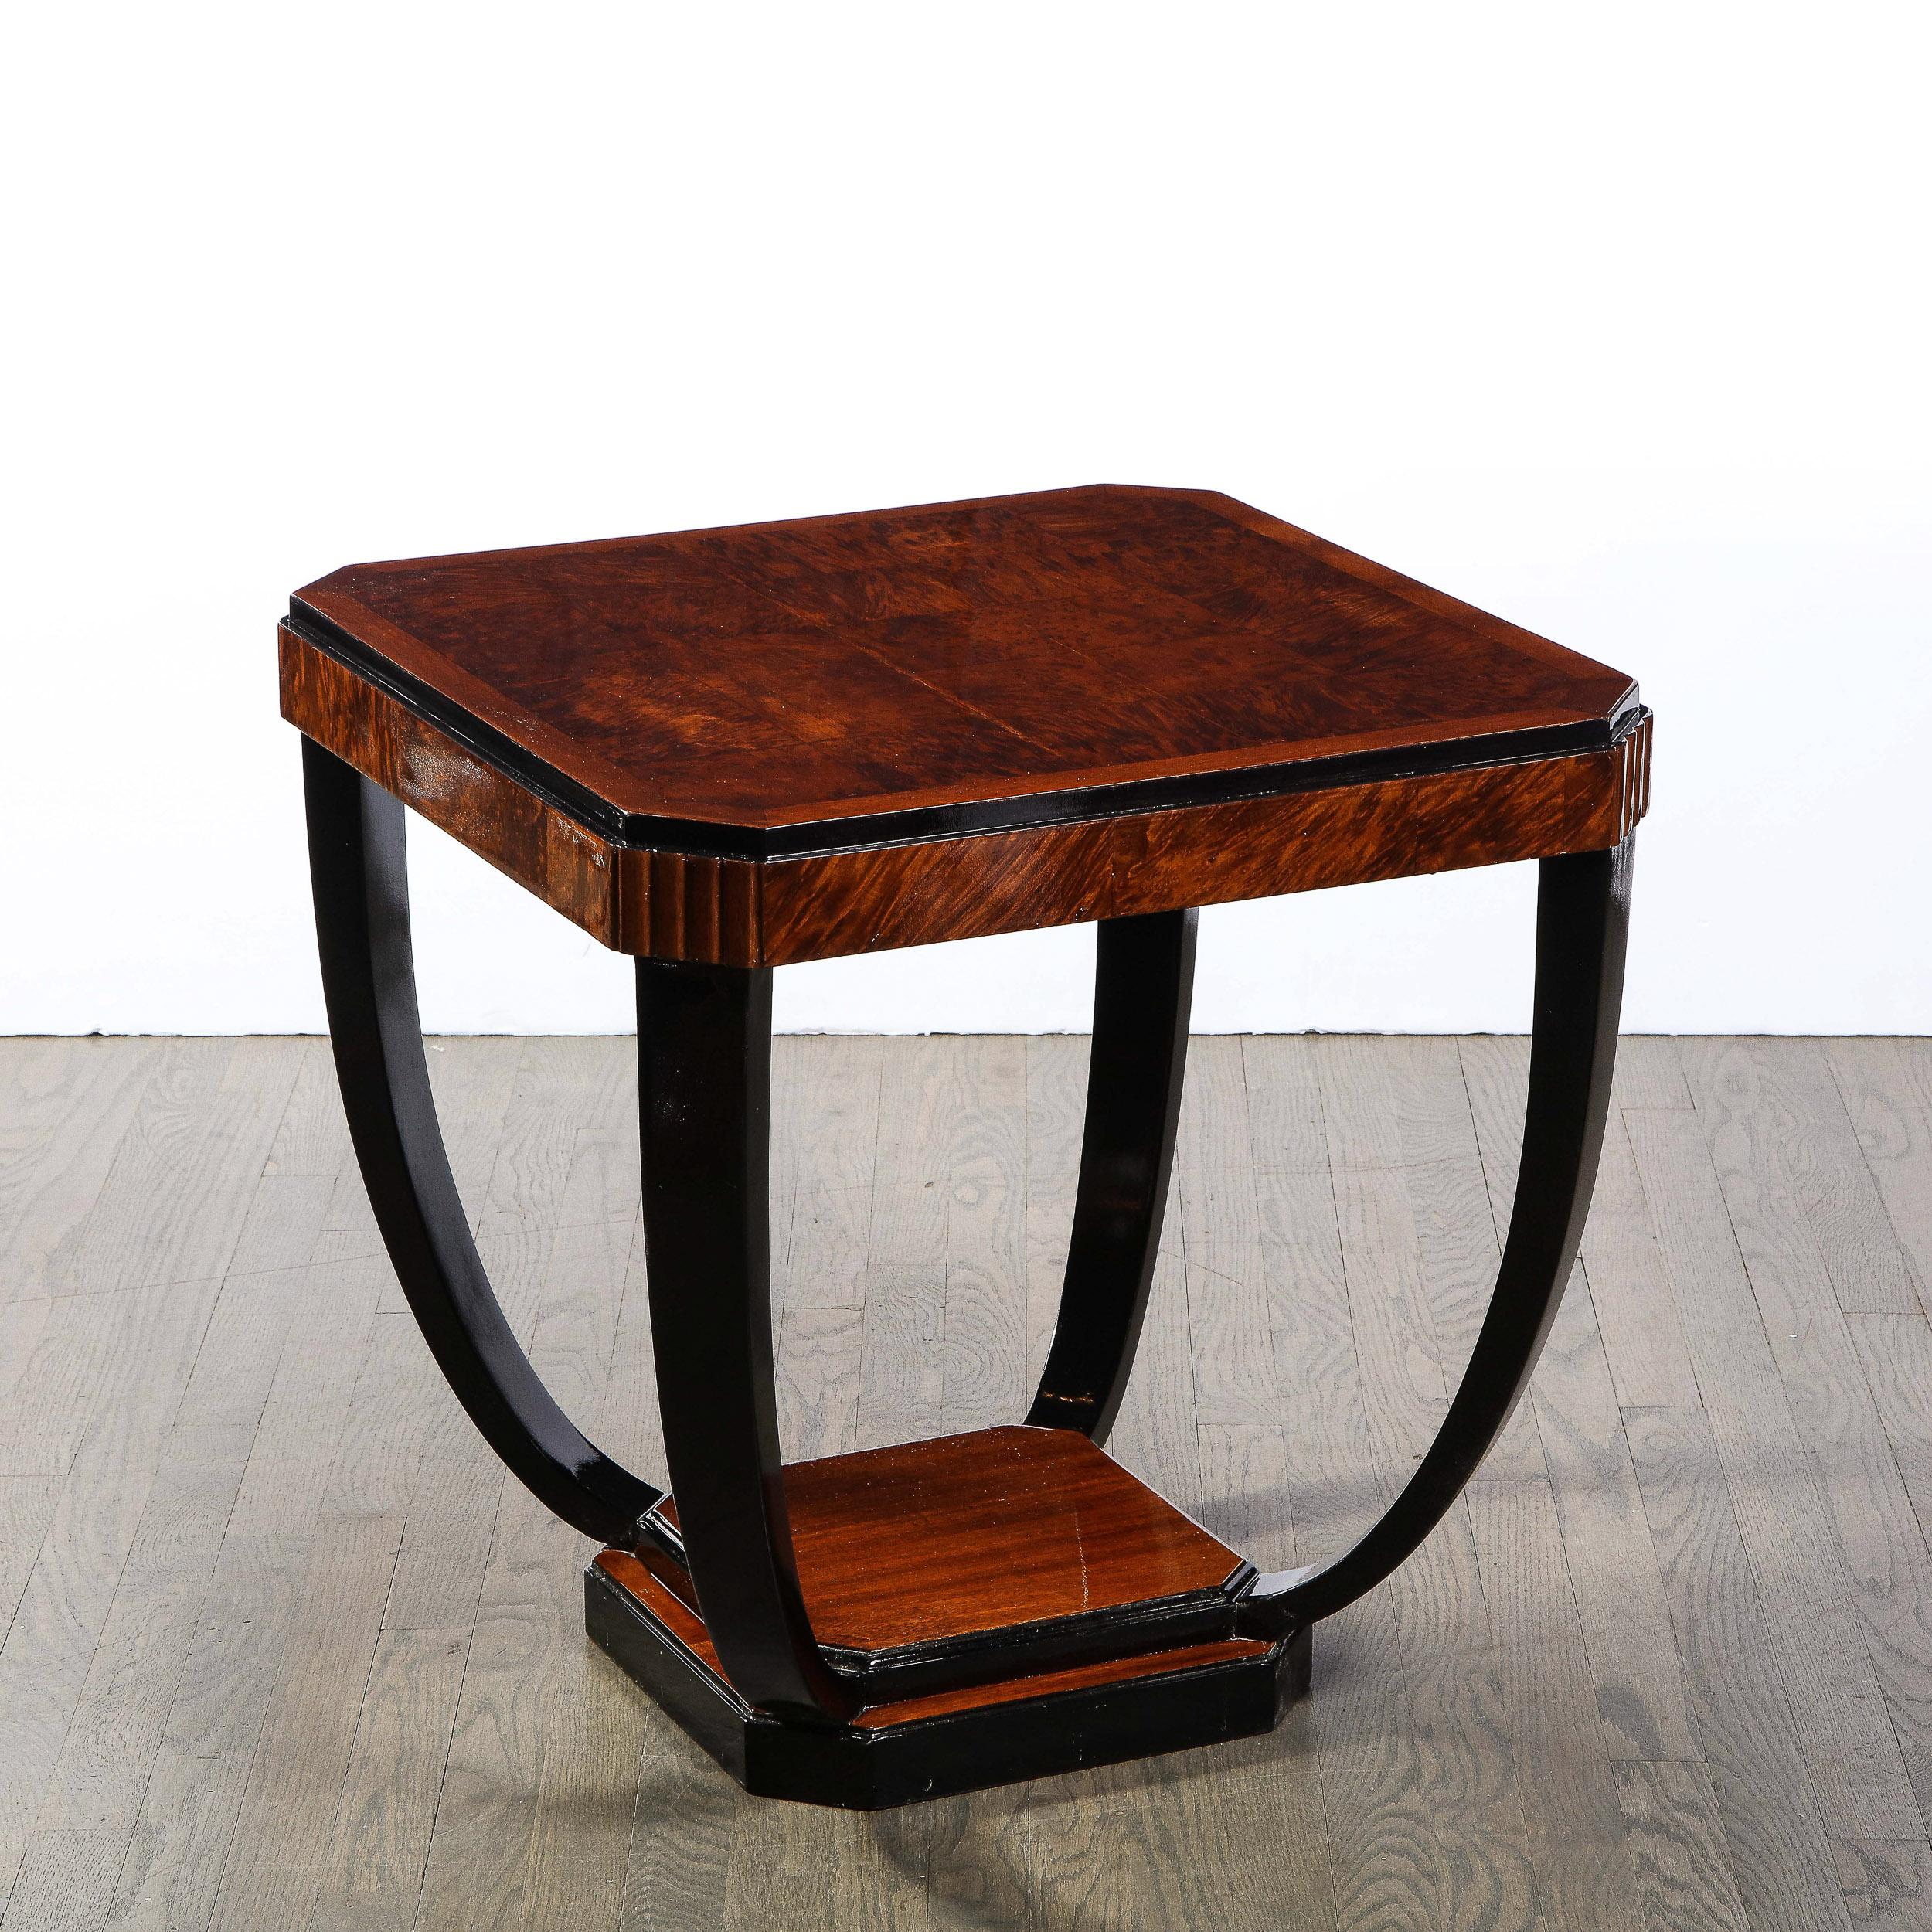 Art Deco Streamlined Cocktail Table in Bookmatched Burled Walnut & Black Lacquer For Sale 3